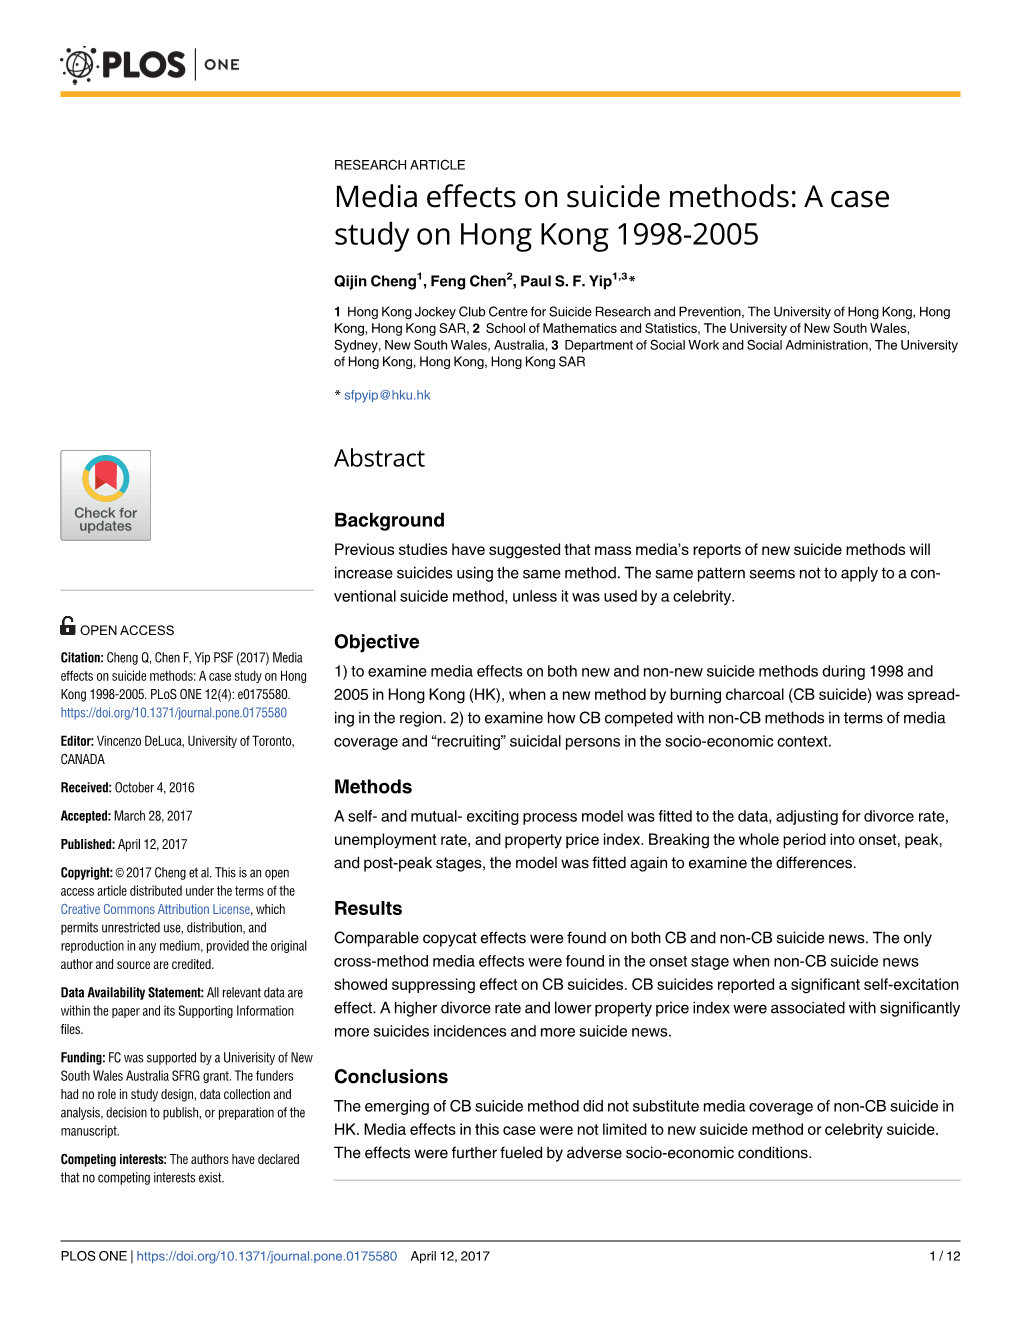 Media Effects on Suicide Methods: a Case Study on Hong Kong 1998-2005